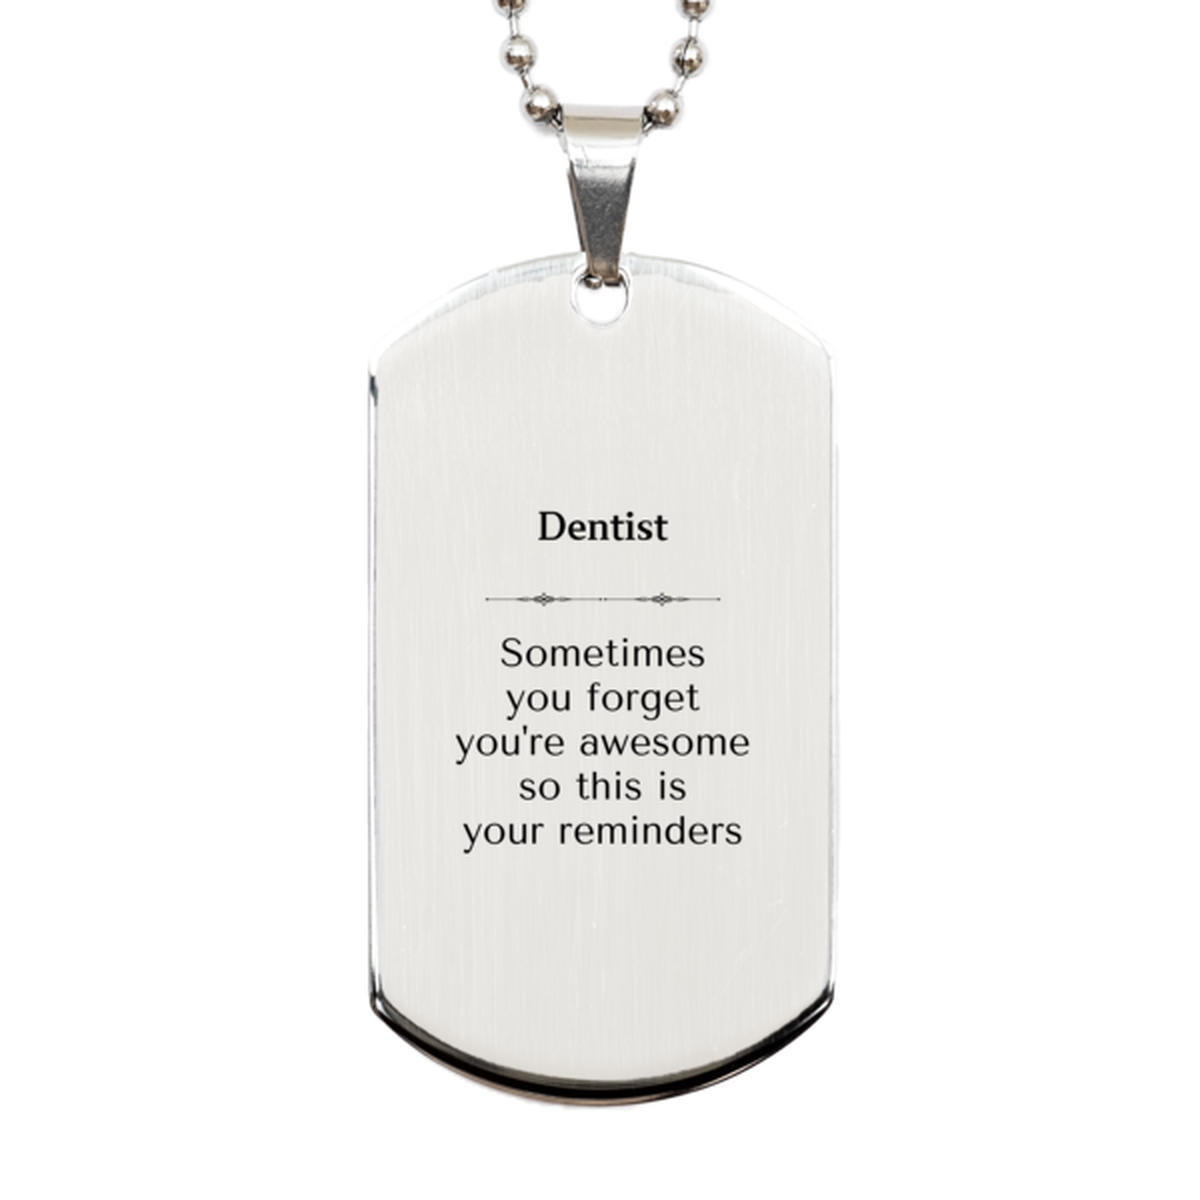 Sentimental Dentist Silver Dog Tag, Dentist Sometimes you forget you're awesome so this is your reminders, Graduation Christmas Birthday Gifts for Dentist, Men, Women, Coworkers